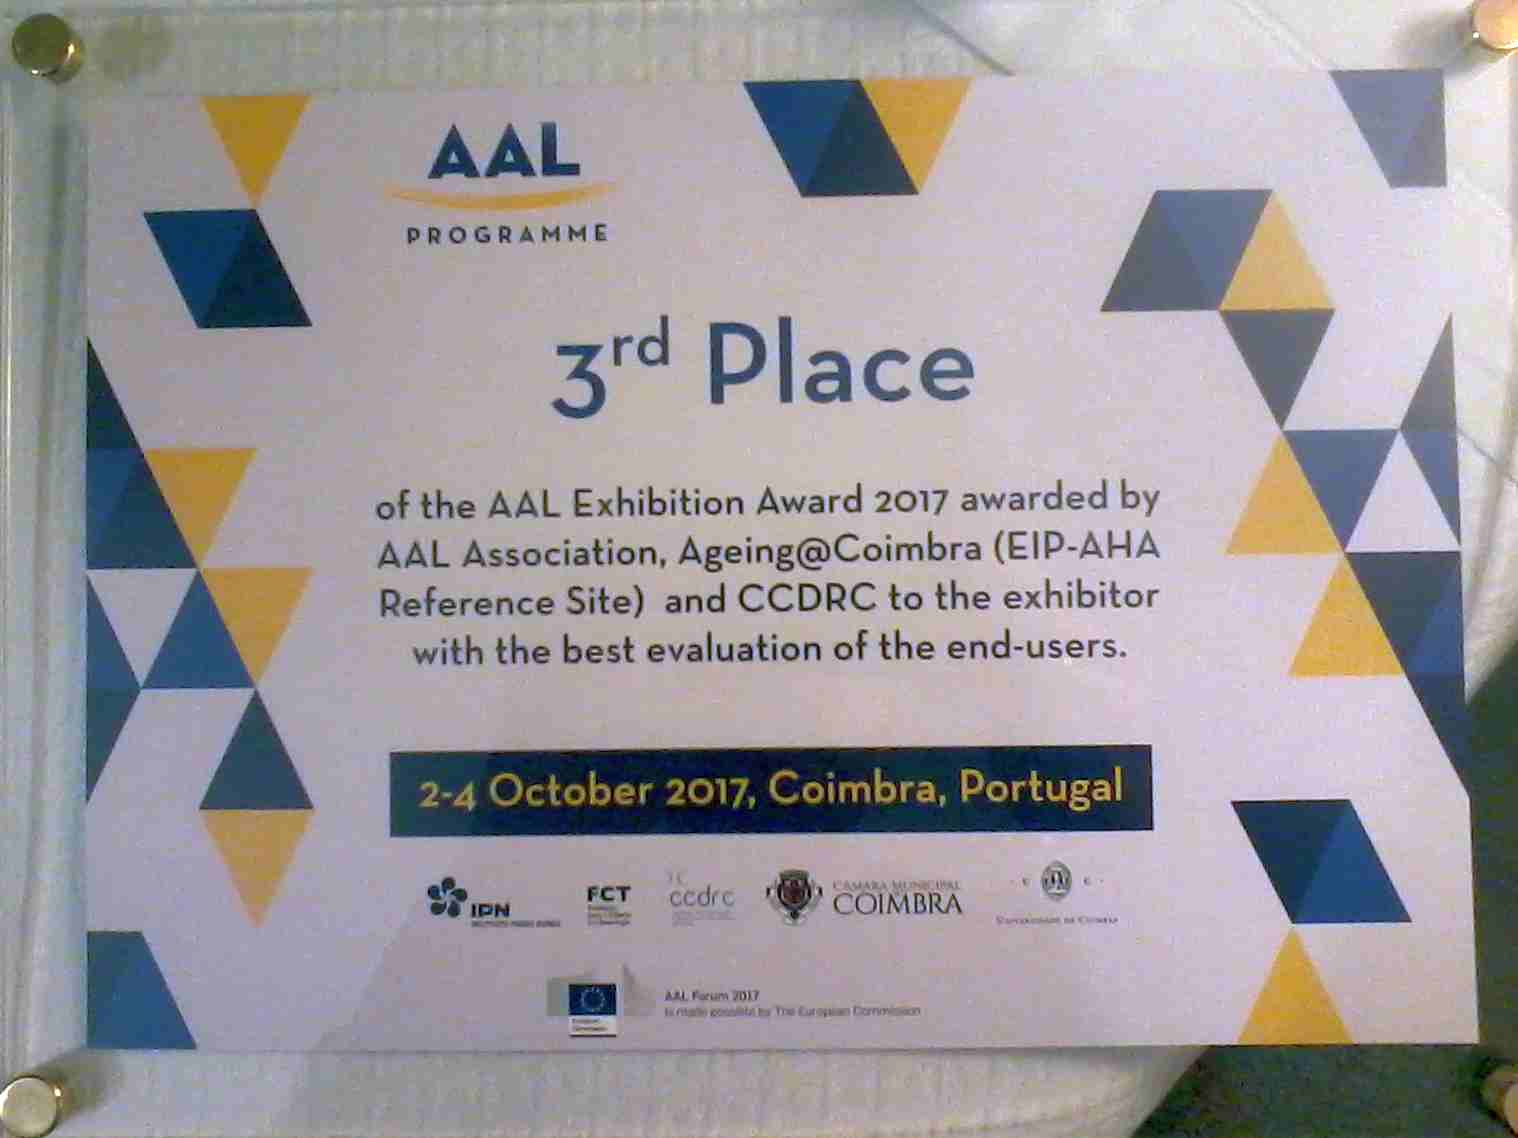 award received for iToilet exhibition booth at AAL Forum 2017 in Coimbra